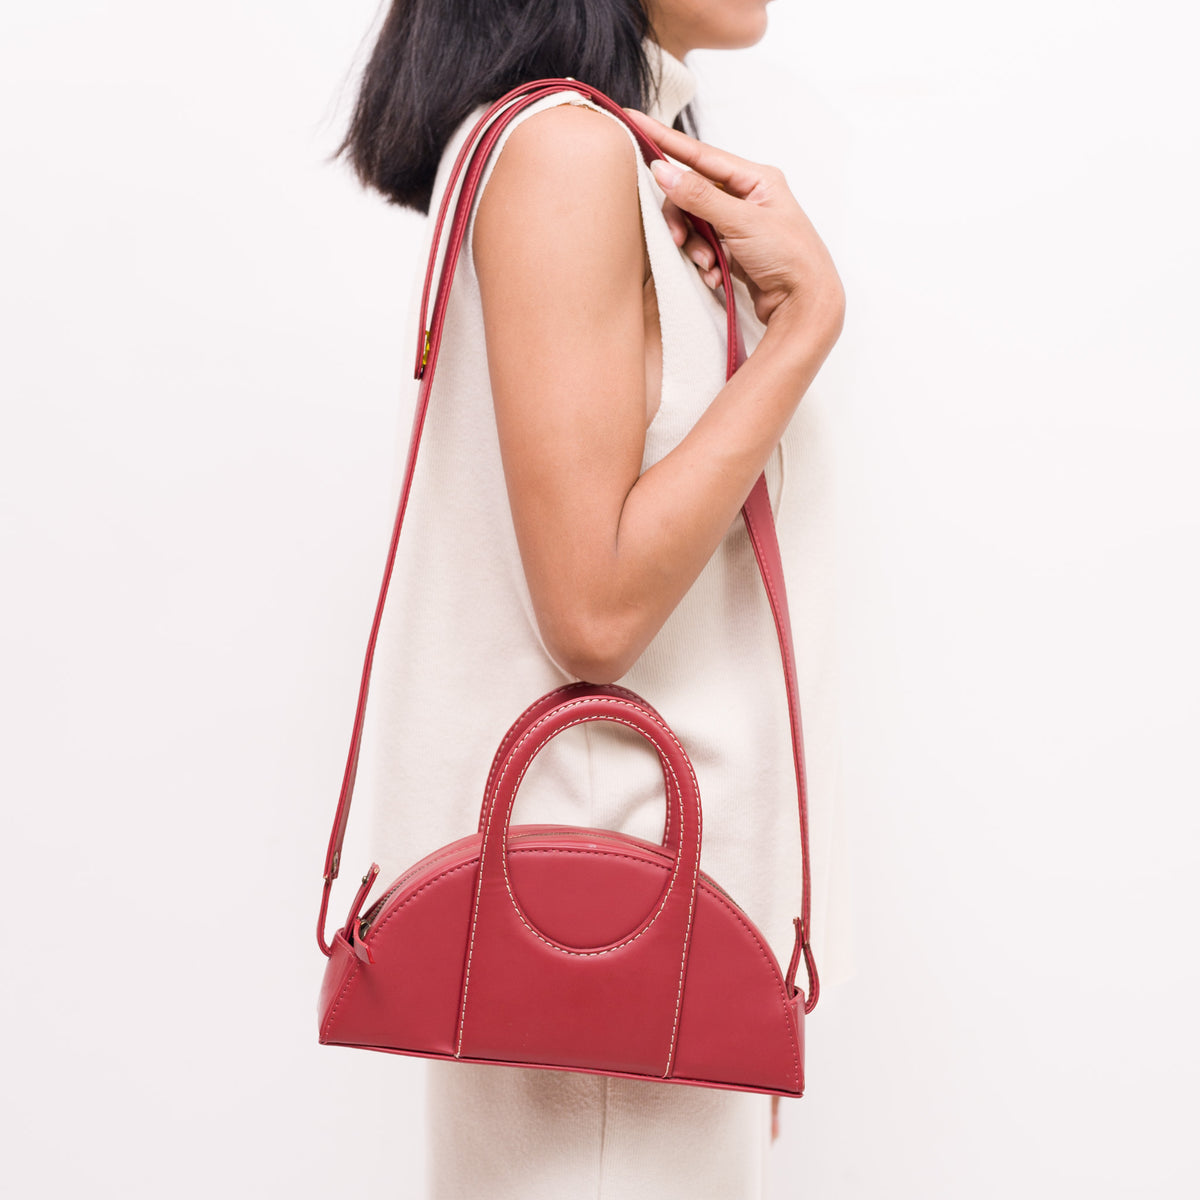 The OOO BAG - Cherry Red